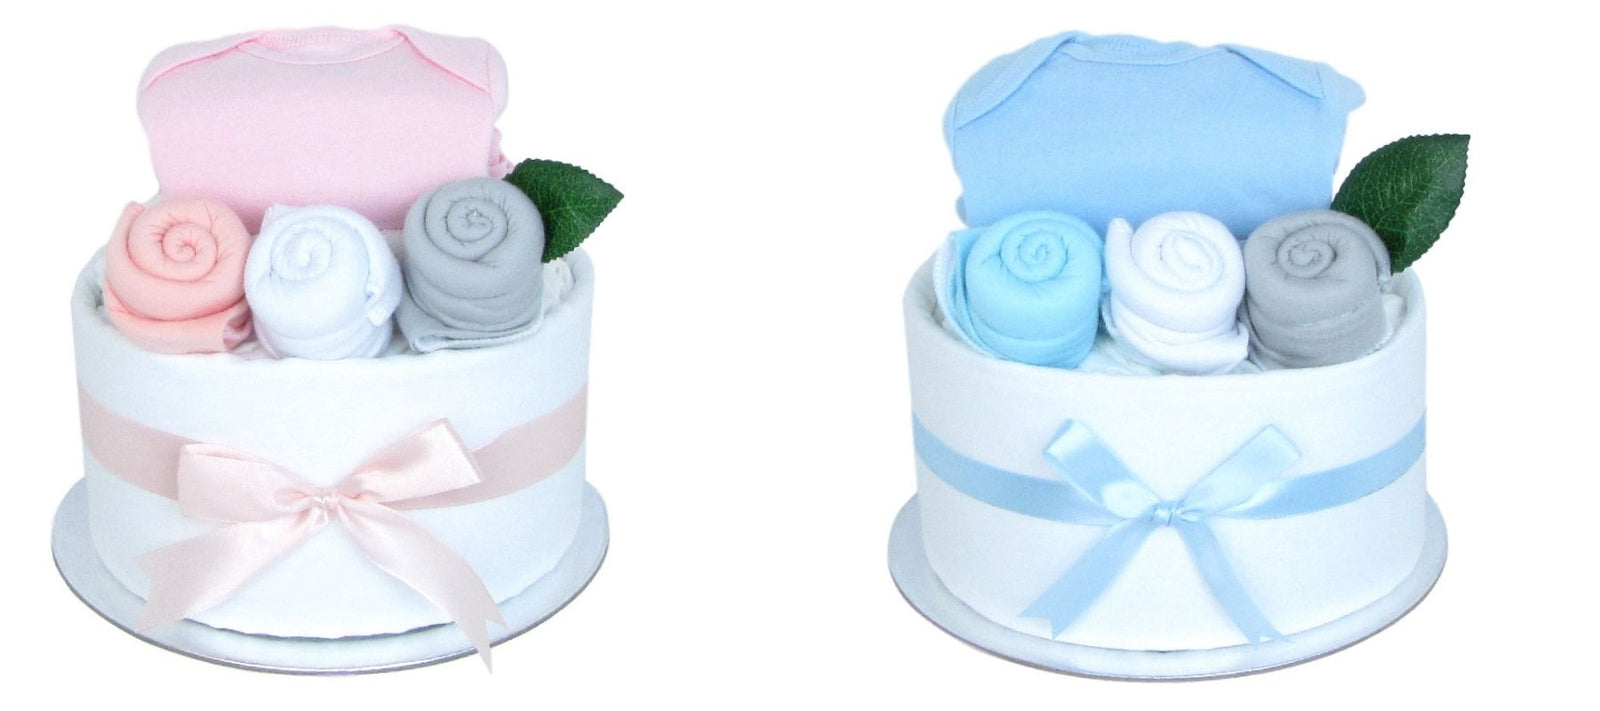 Your Guide to Buying Newborn Baby Gifts Online. Bespoke Baby Gifts